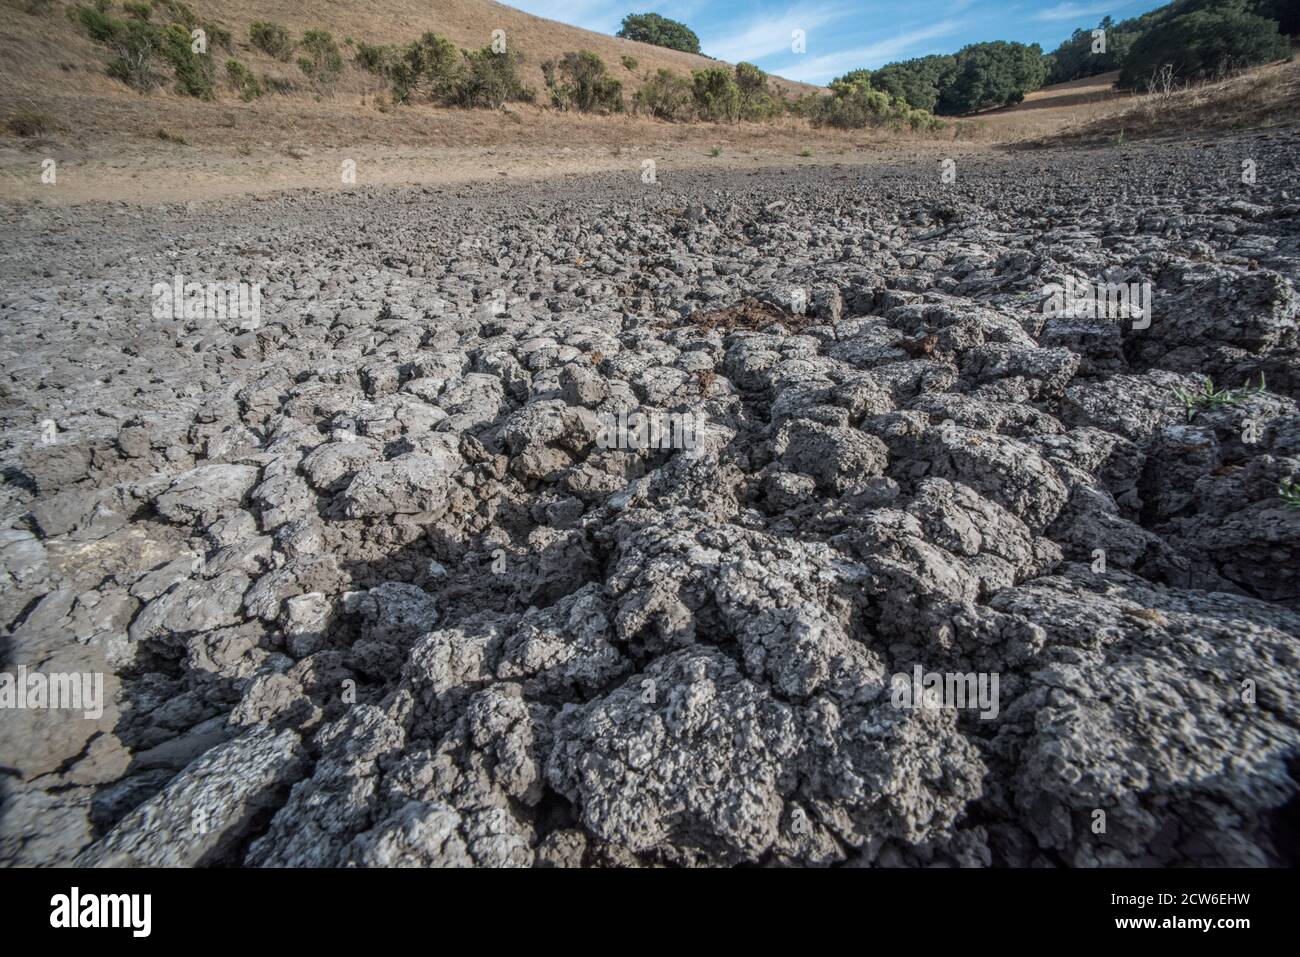 A dried up cattle pond in the East Bay hills in Northern California, rains have become less regular and water has dried up leaving only hardened mud. Stock Photo